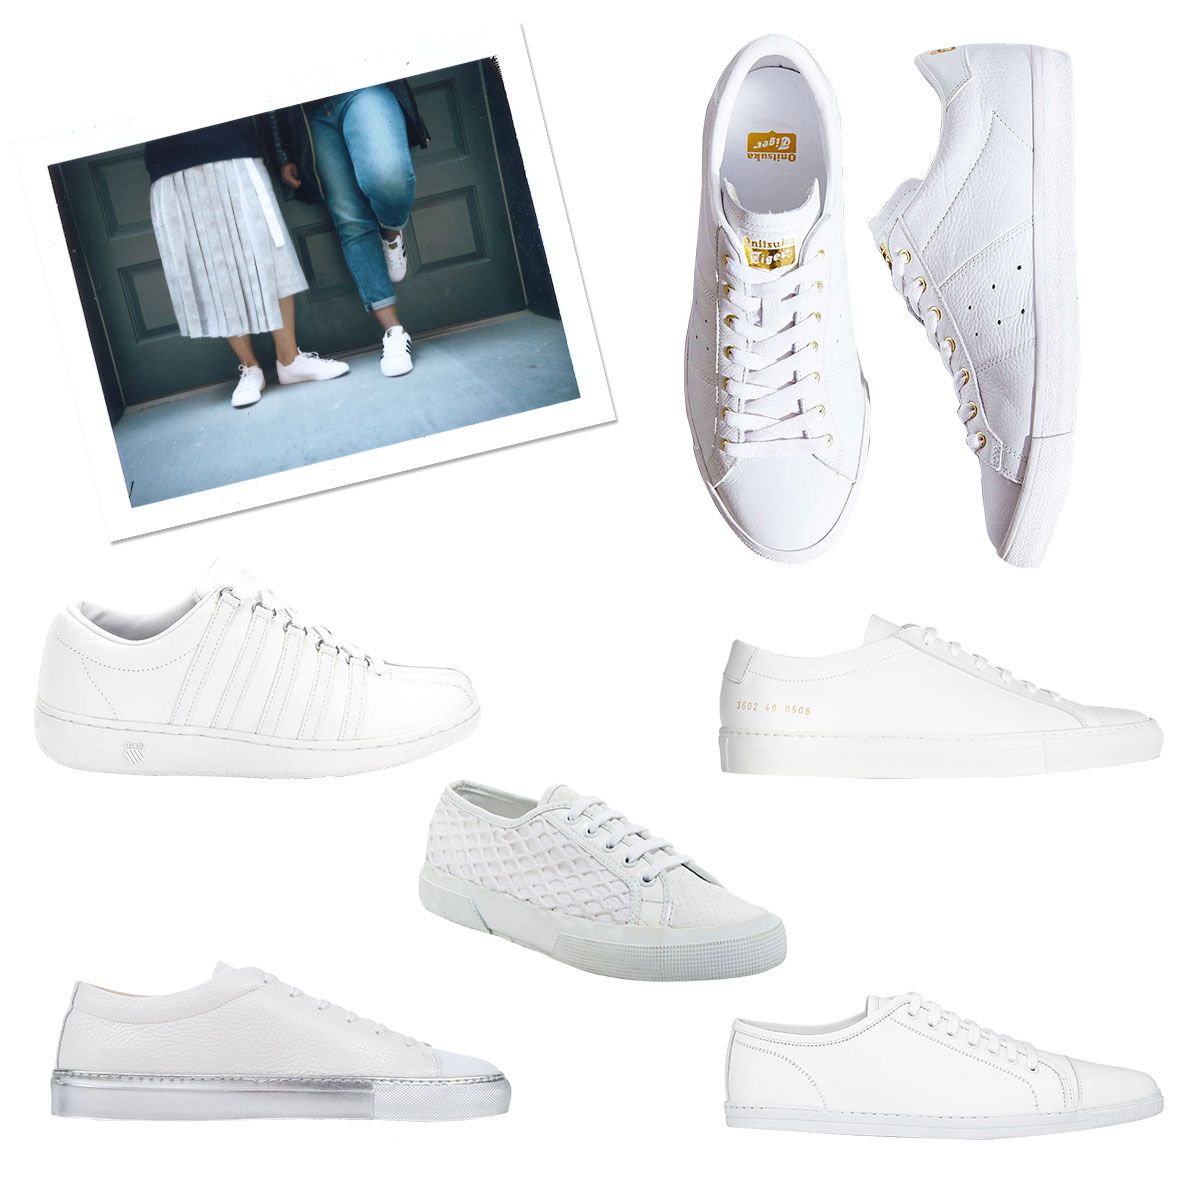 effect vroegrijp Malaise No, the White Sneaker Trend Is Not Over